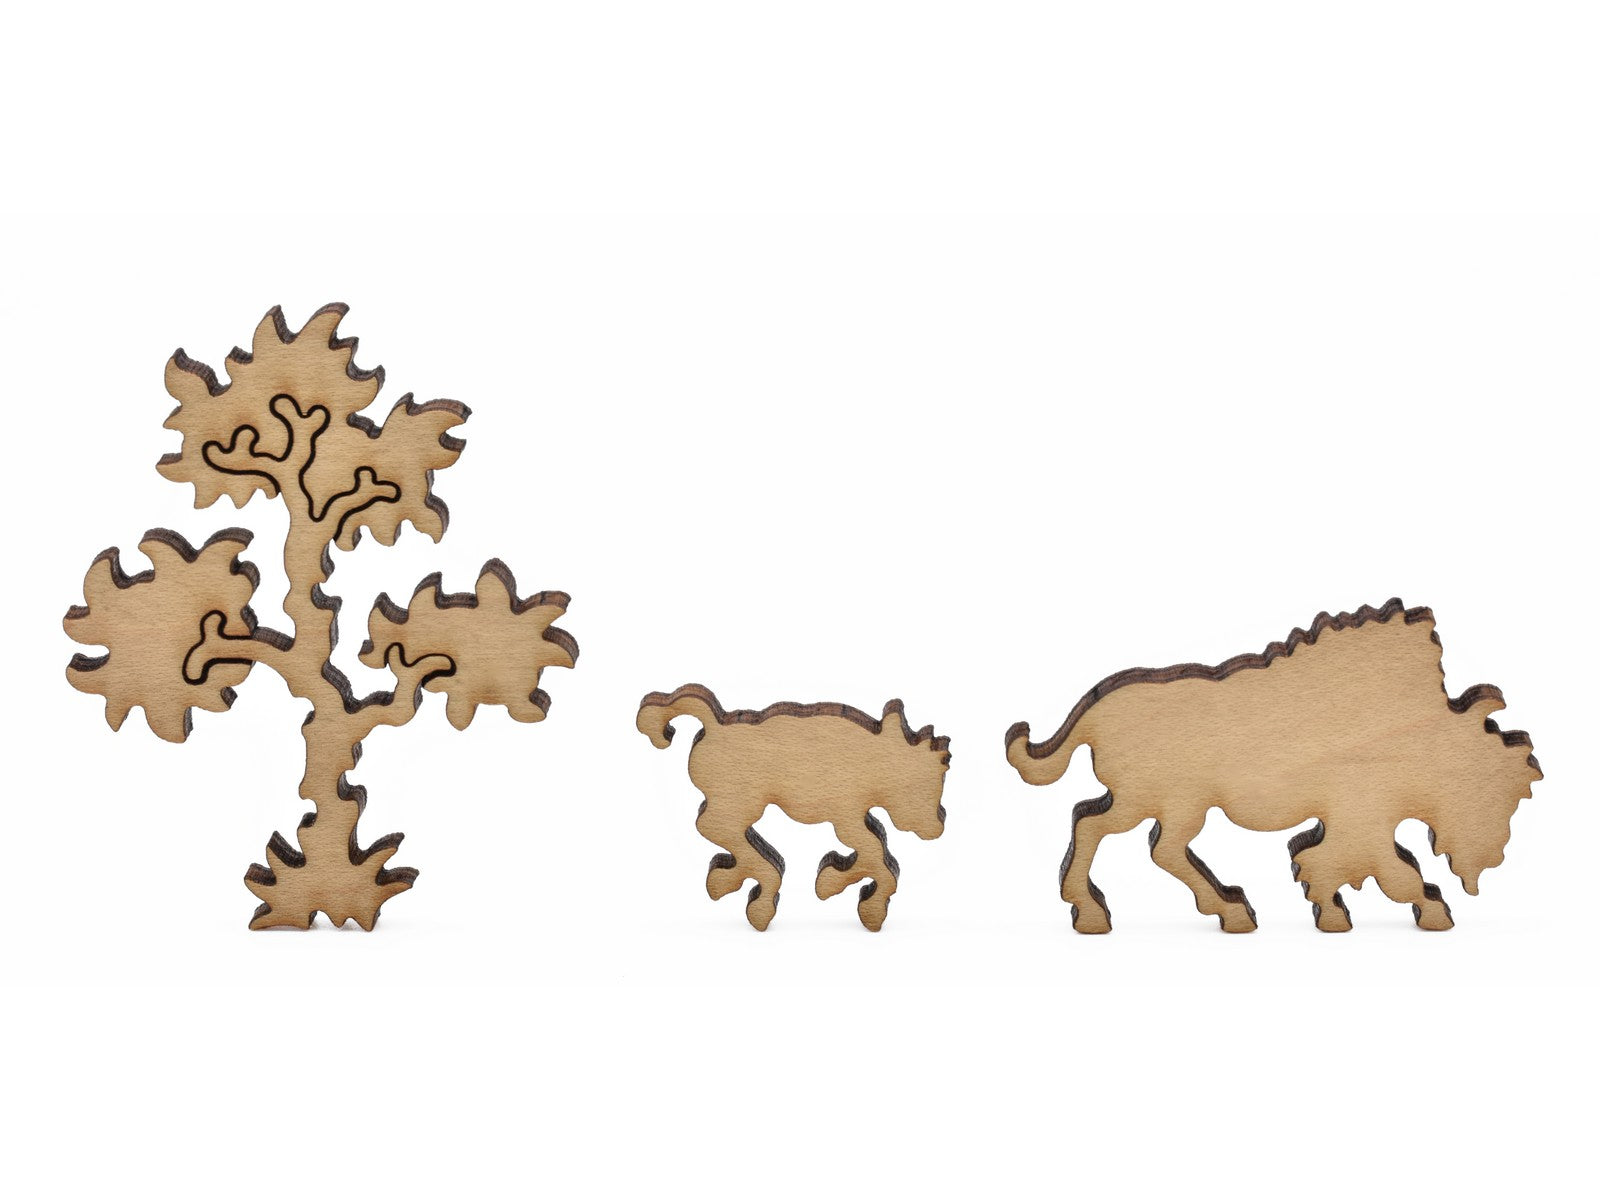 A closeup of pieces in the shape of a tree, a bison, and it's calf.